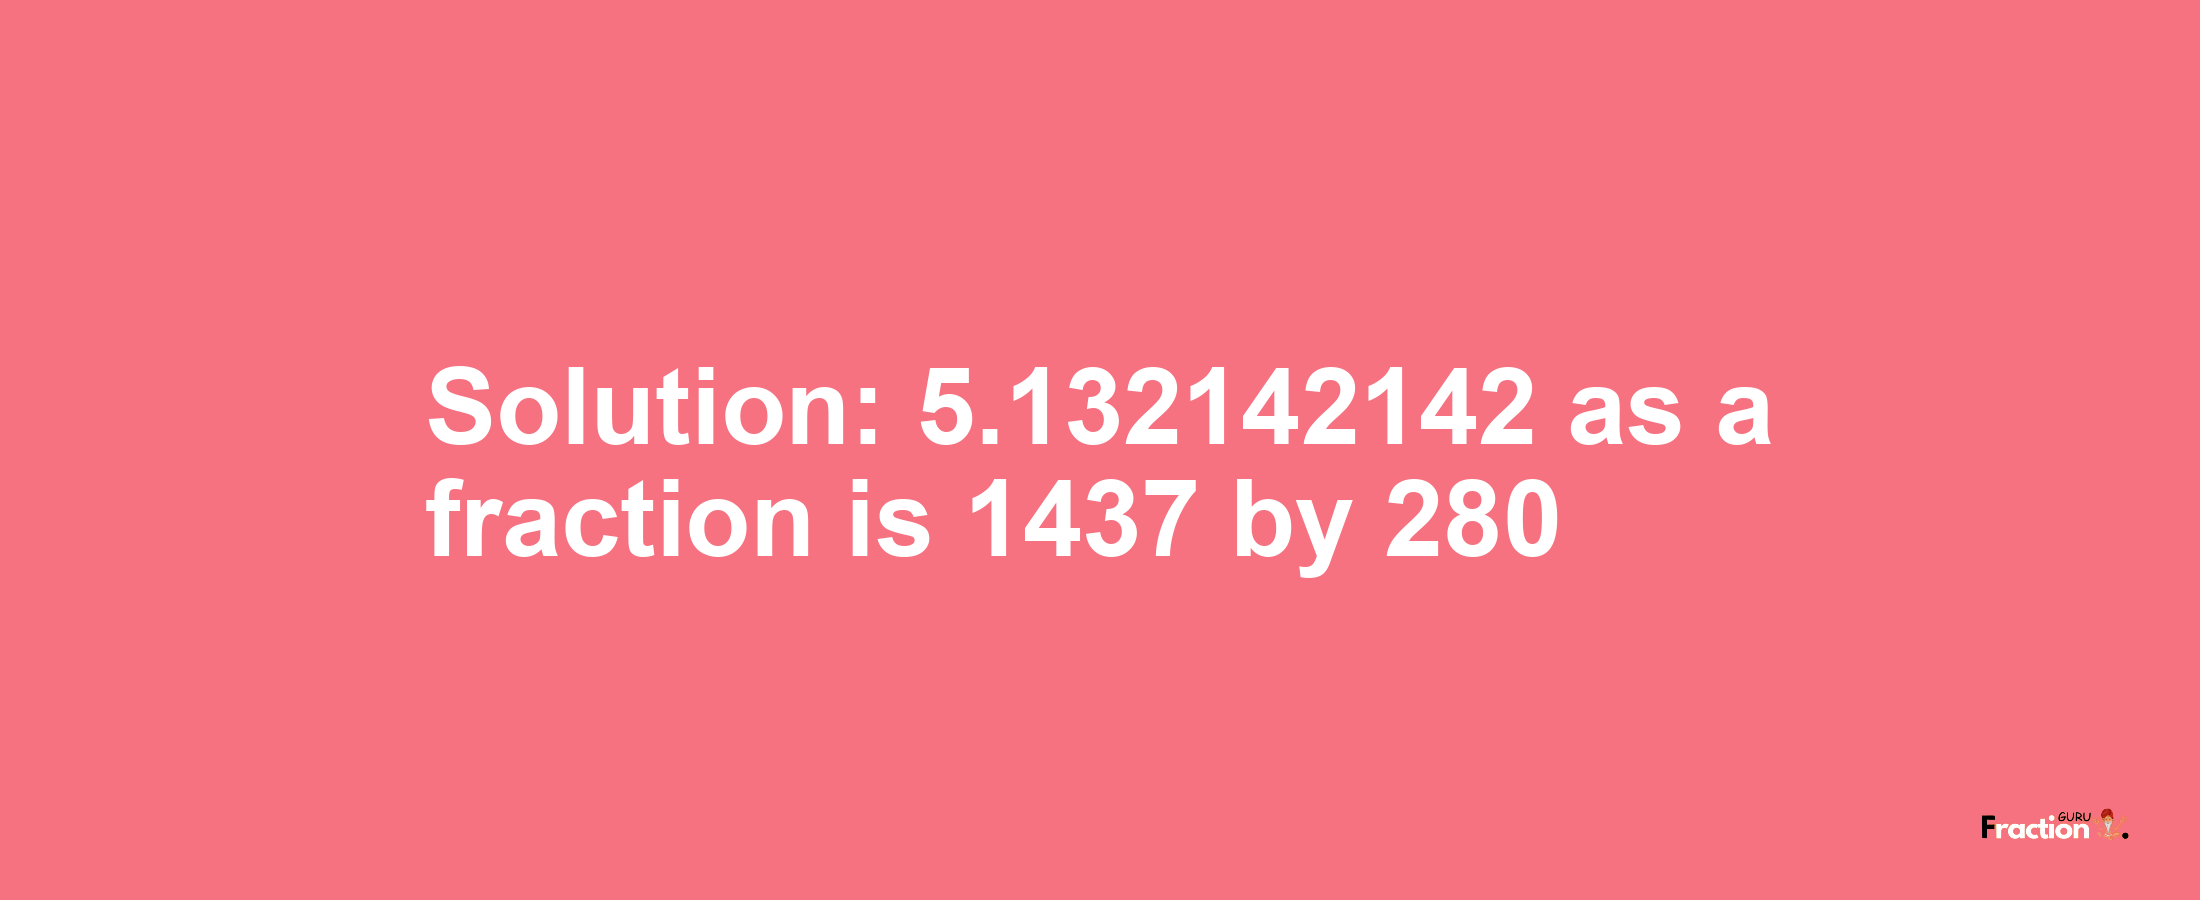 Solution:5.132142142 as a fraction is 1437/280